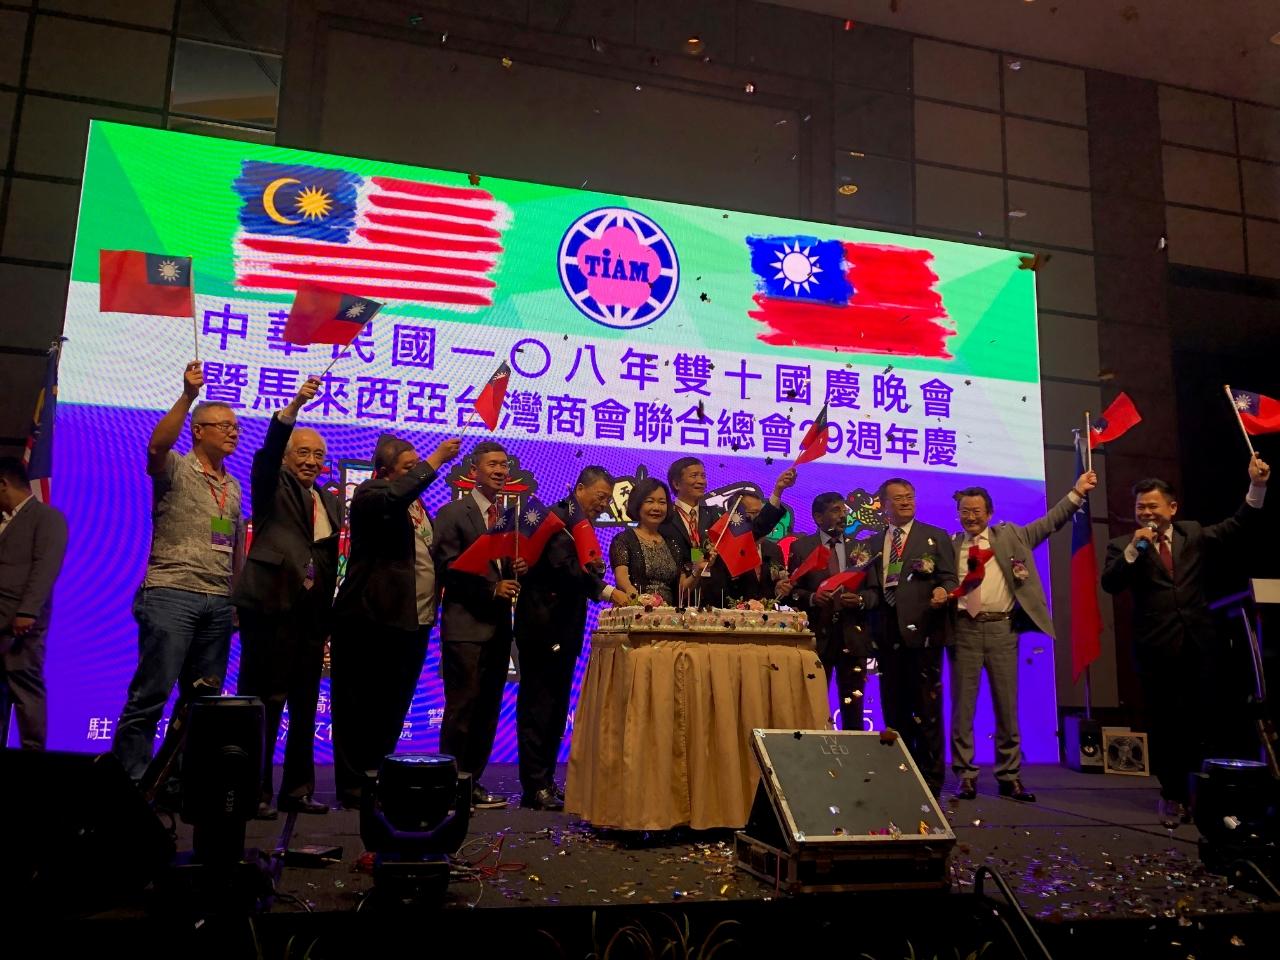 Representative Anne Hung (sixth from left) celebrates the National Day of the Republic of China by cutting the cake with the distinguished guests.